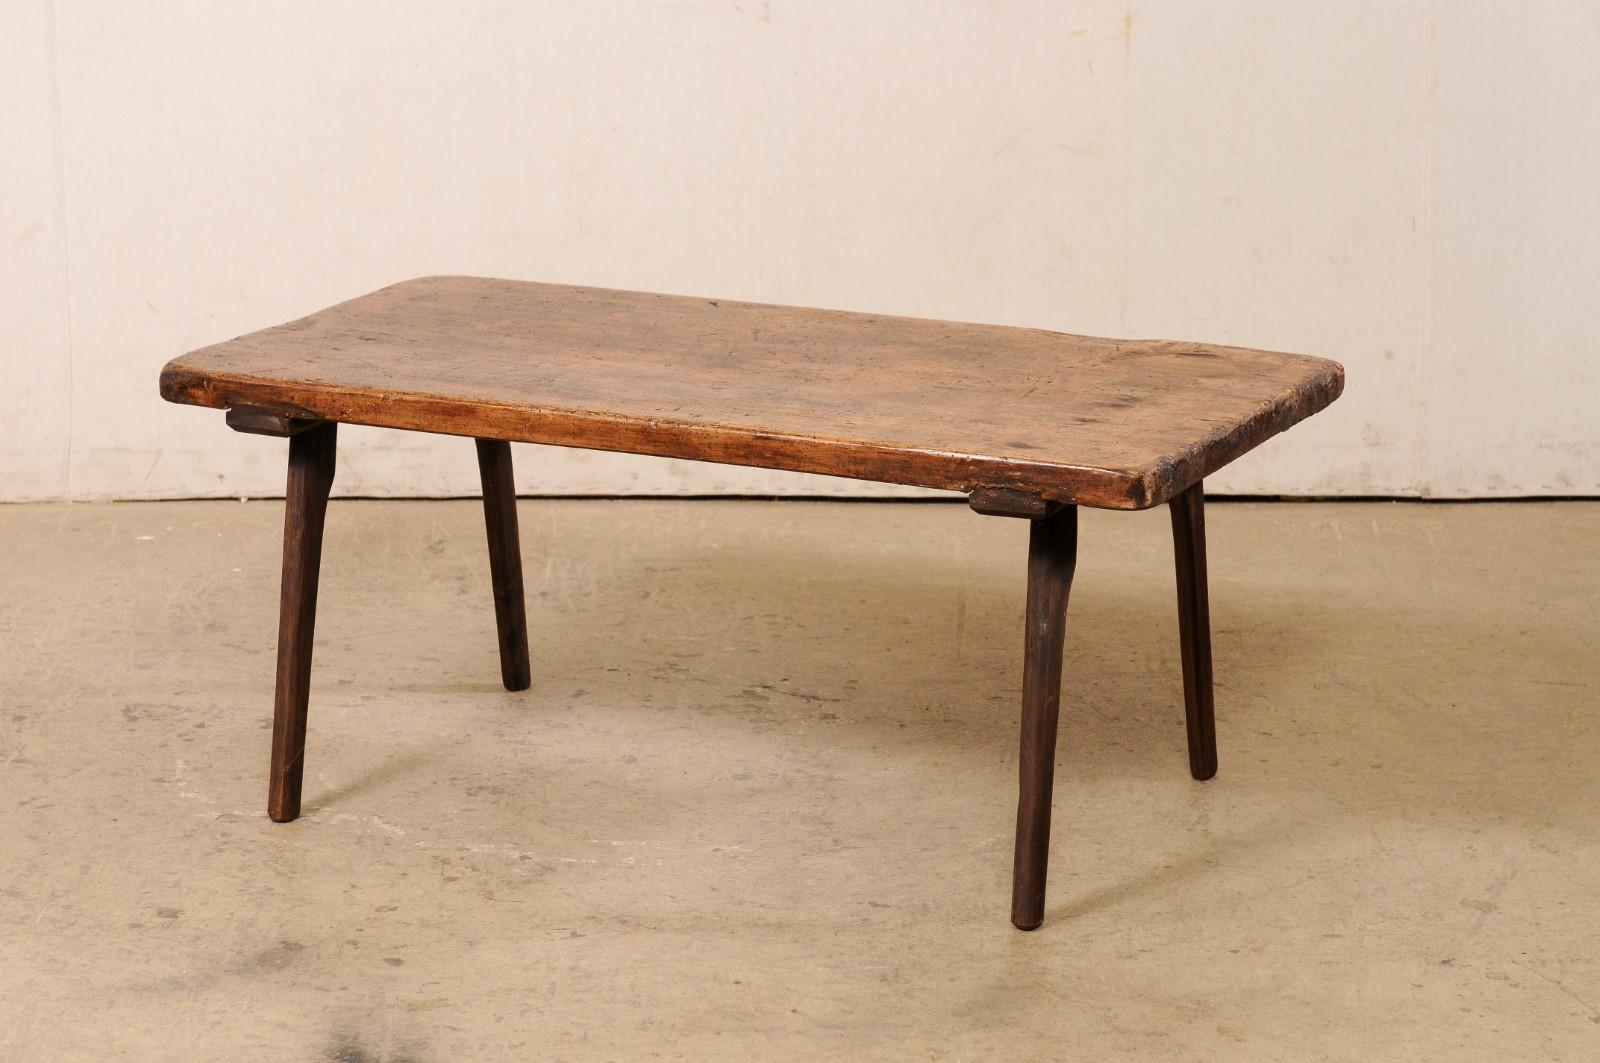 Spanish Rustic Wood Rectangular-Shaped Single Board Top Coffee Table, 19th C. For Sale 6